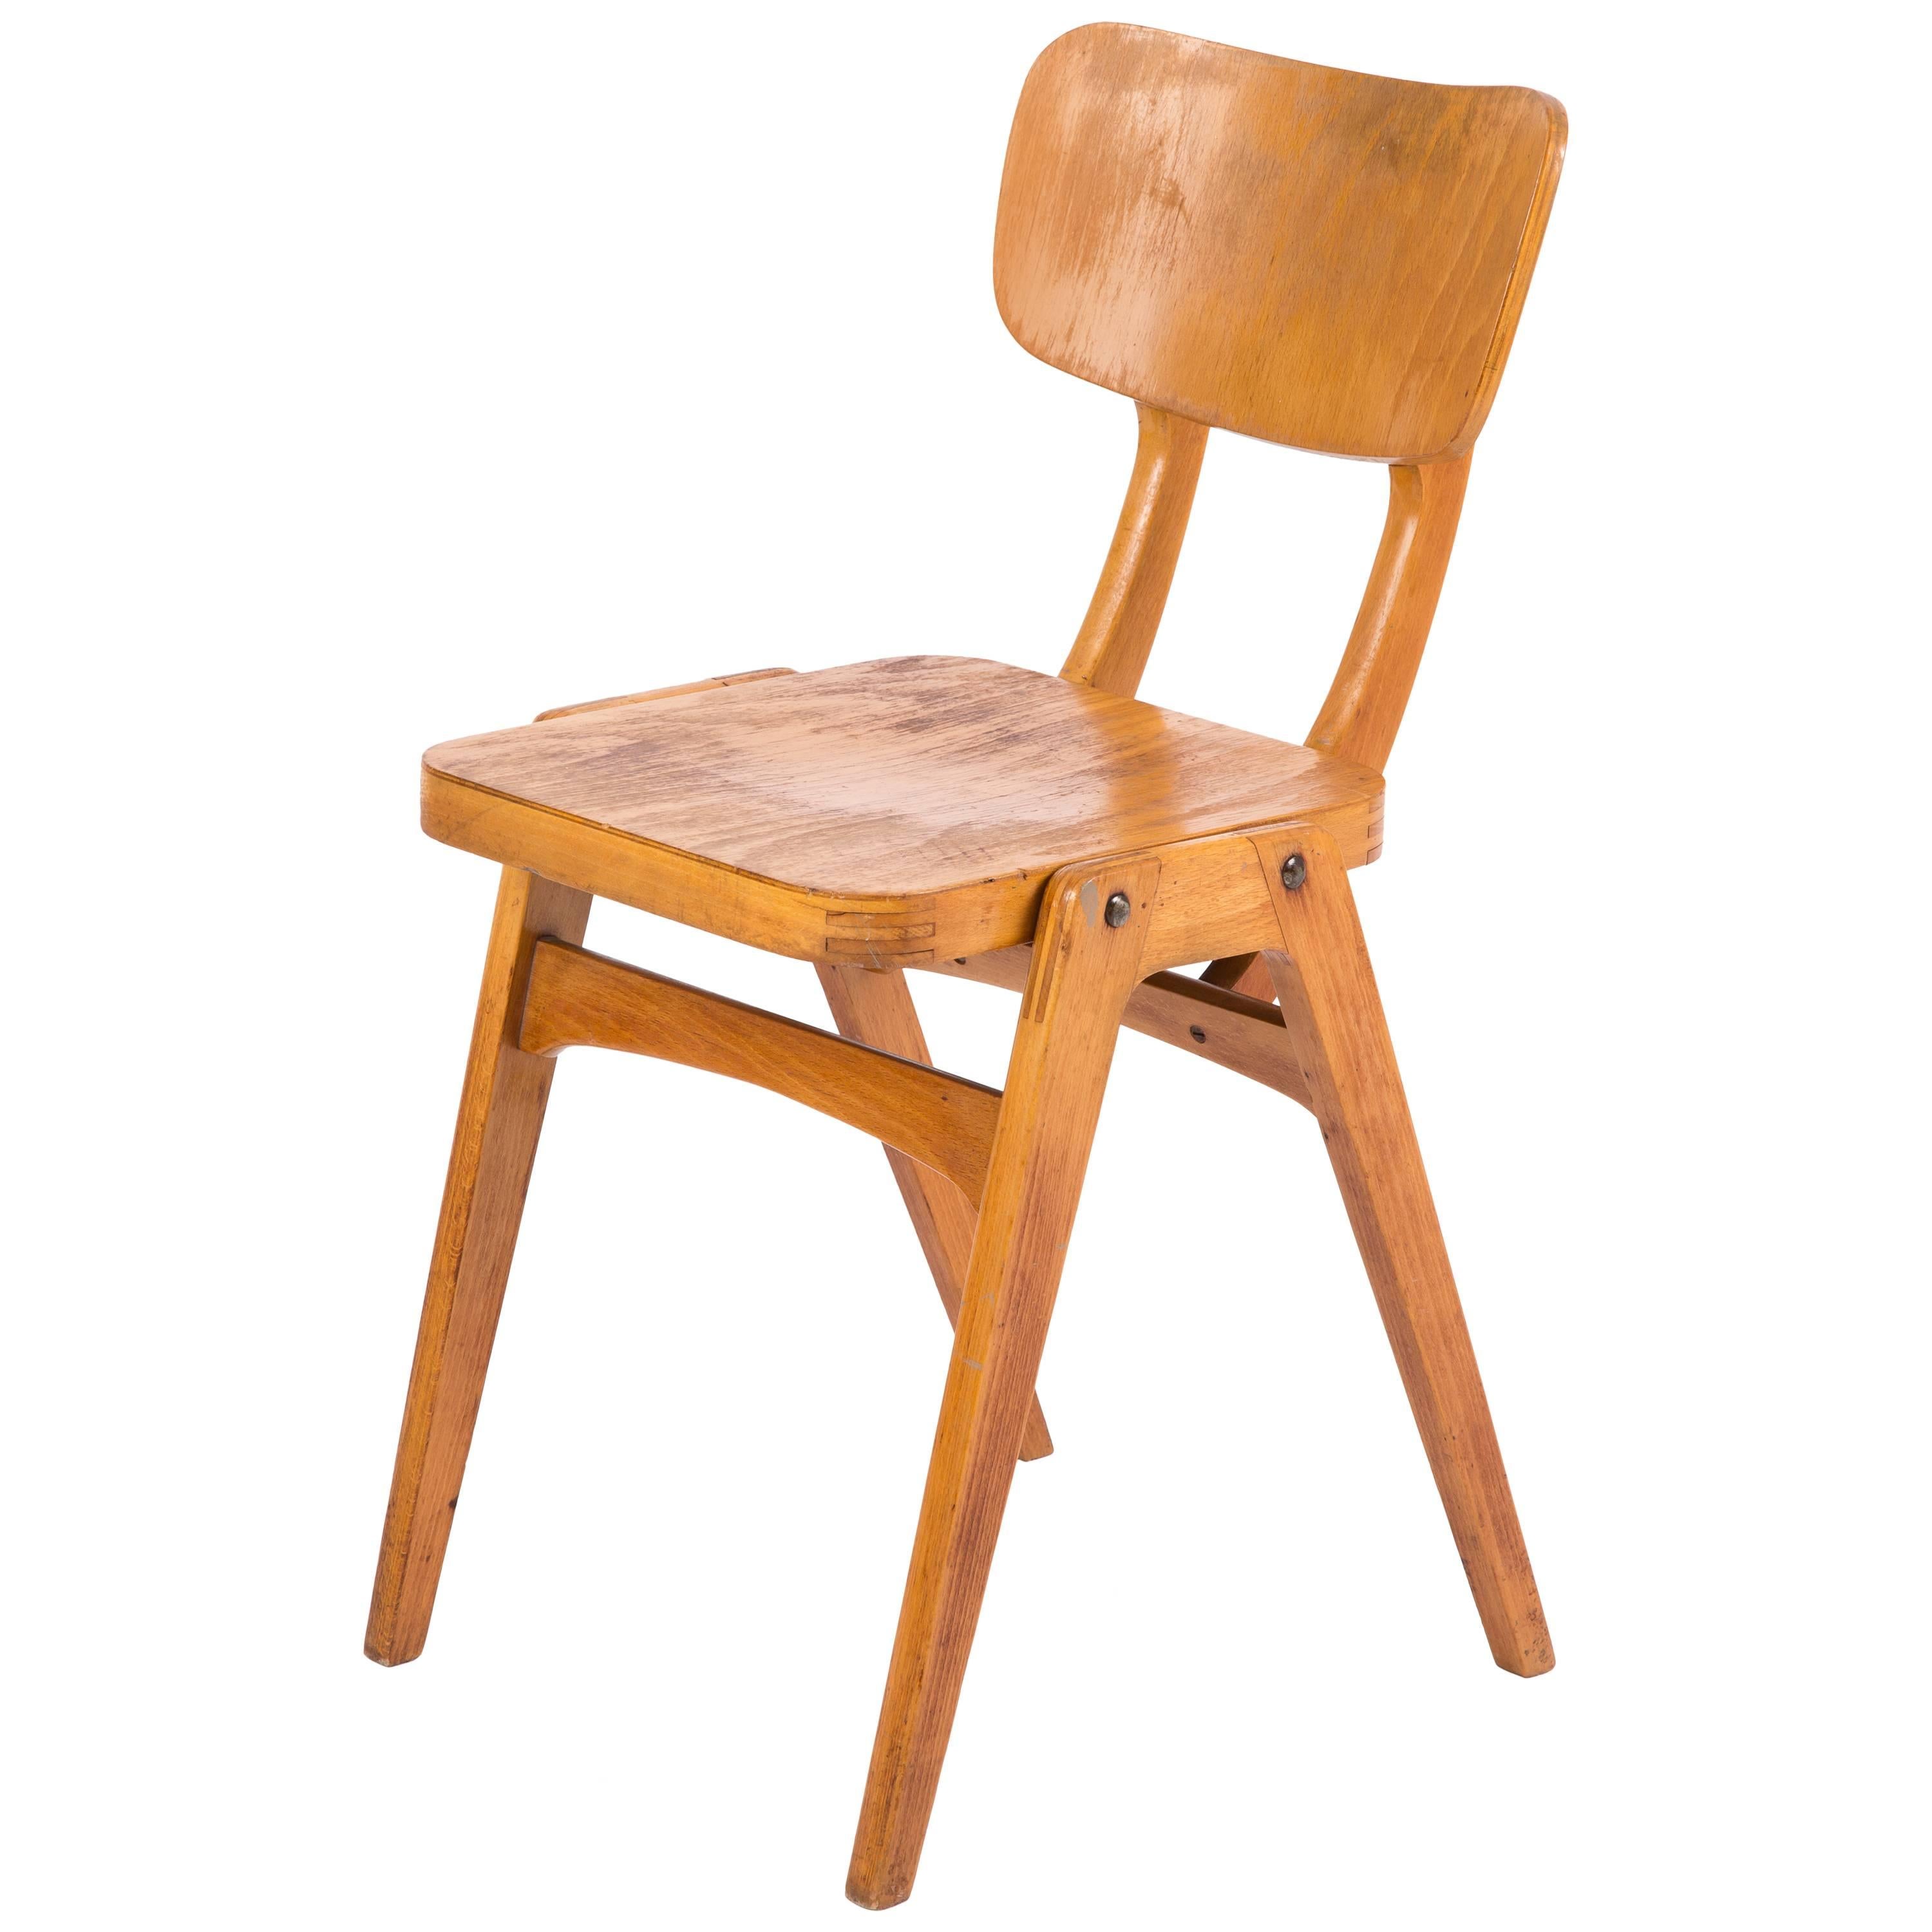 Wood Construction Childrens Chair Plywood